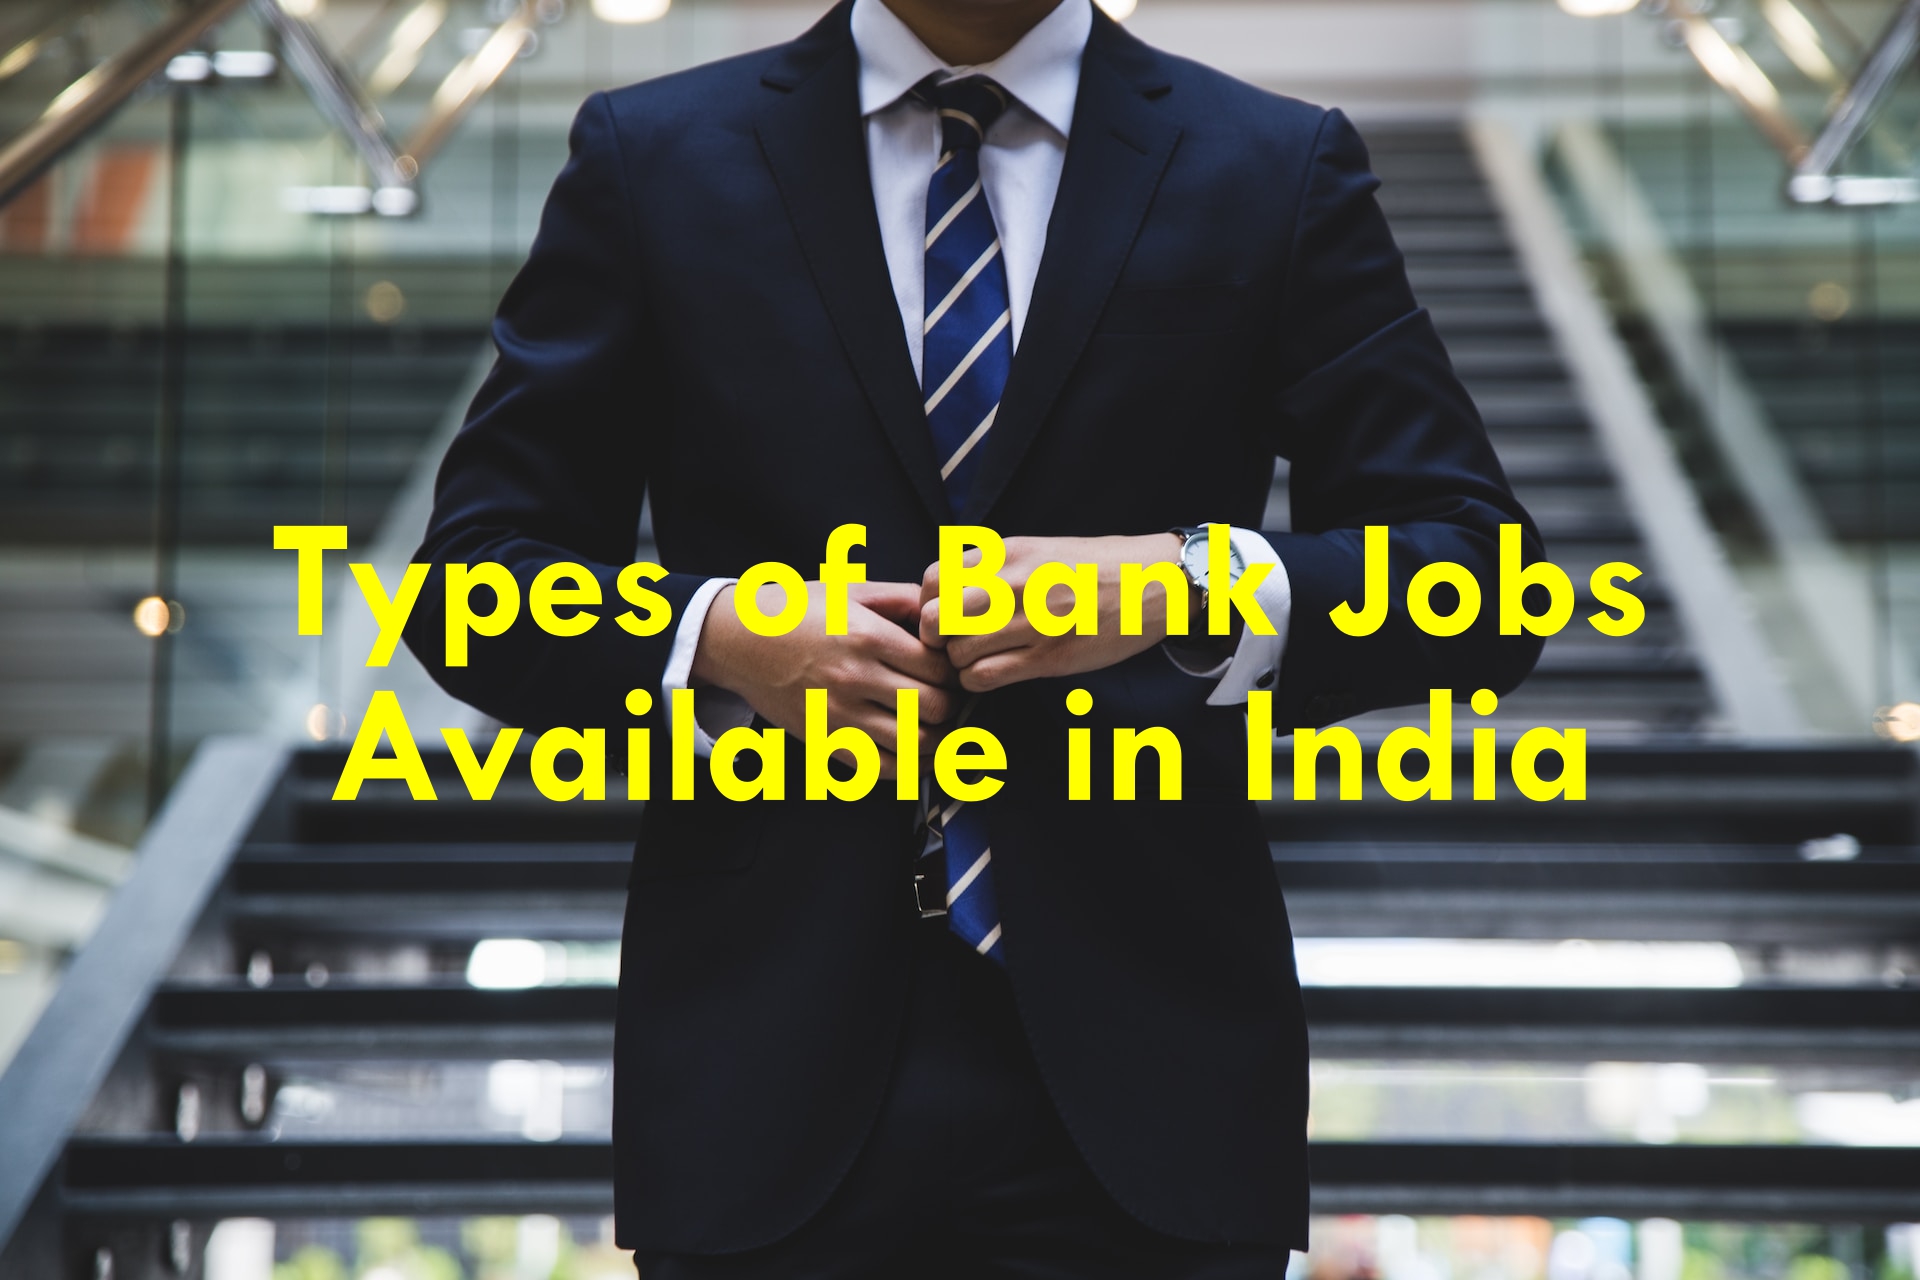 Types of Bank Jobs Available in India